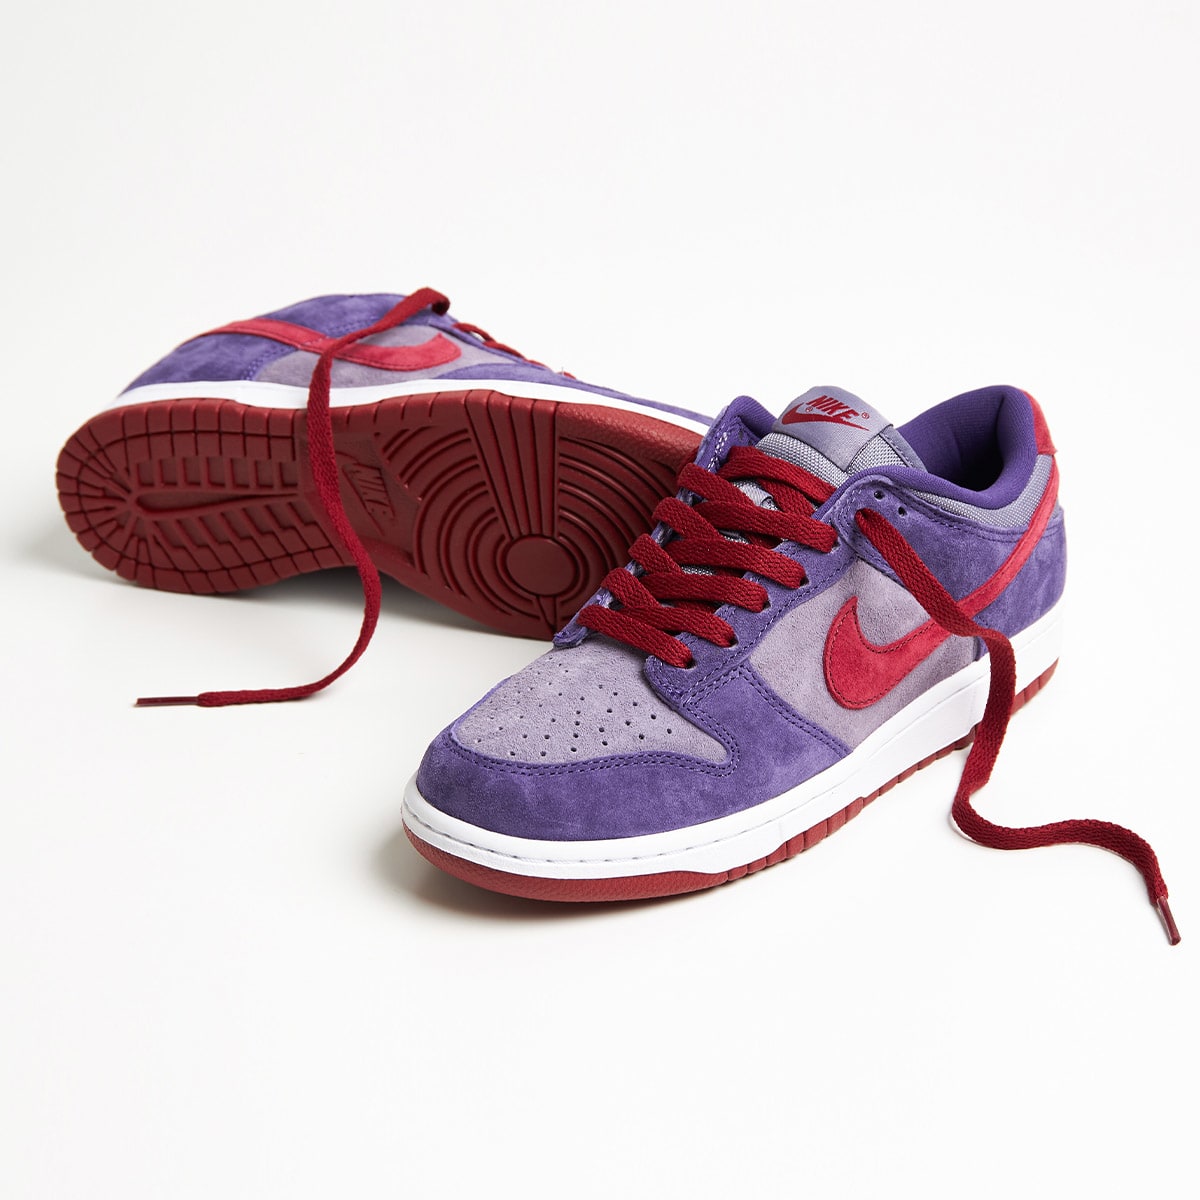 Nike Dunk Low SP (Daybreak, Barn & Plum) | END. Launches